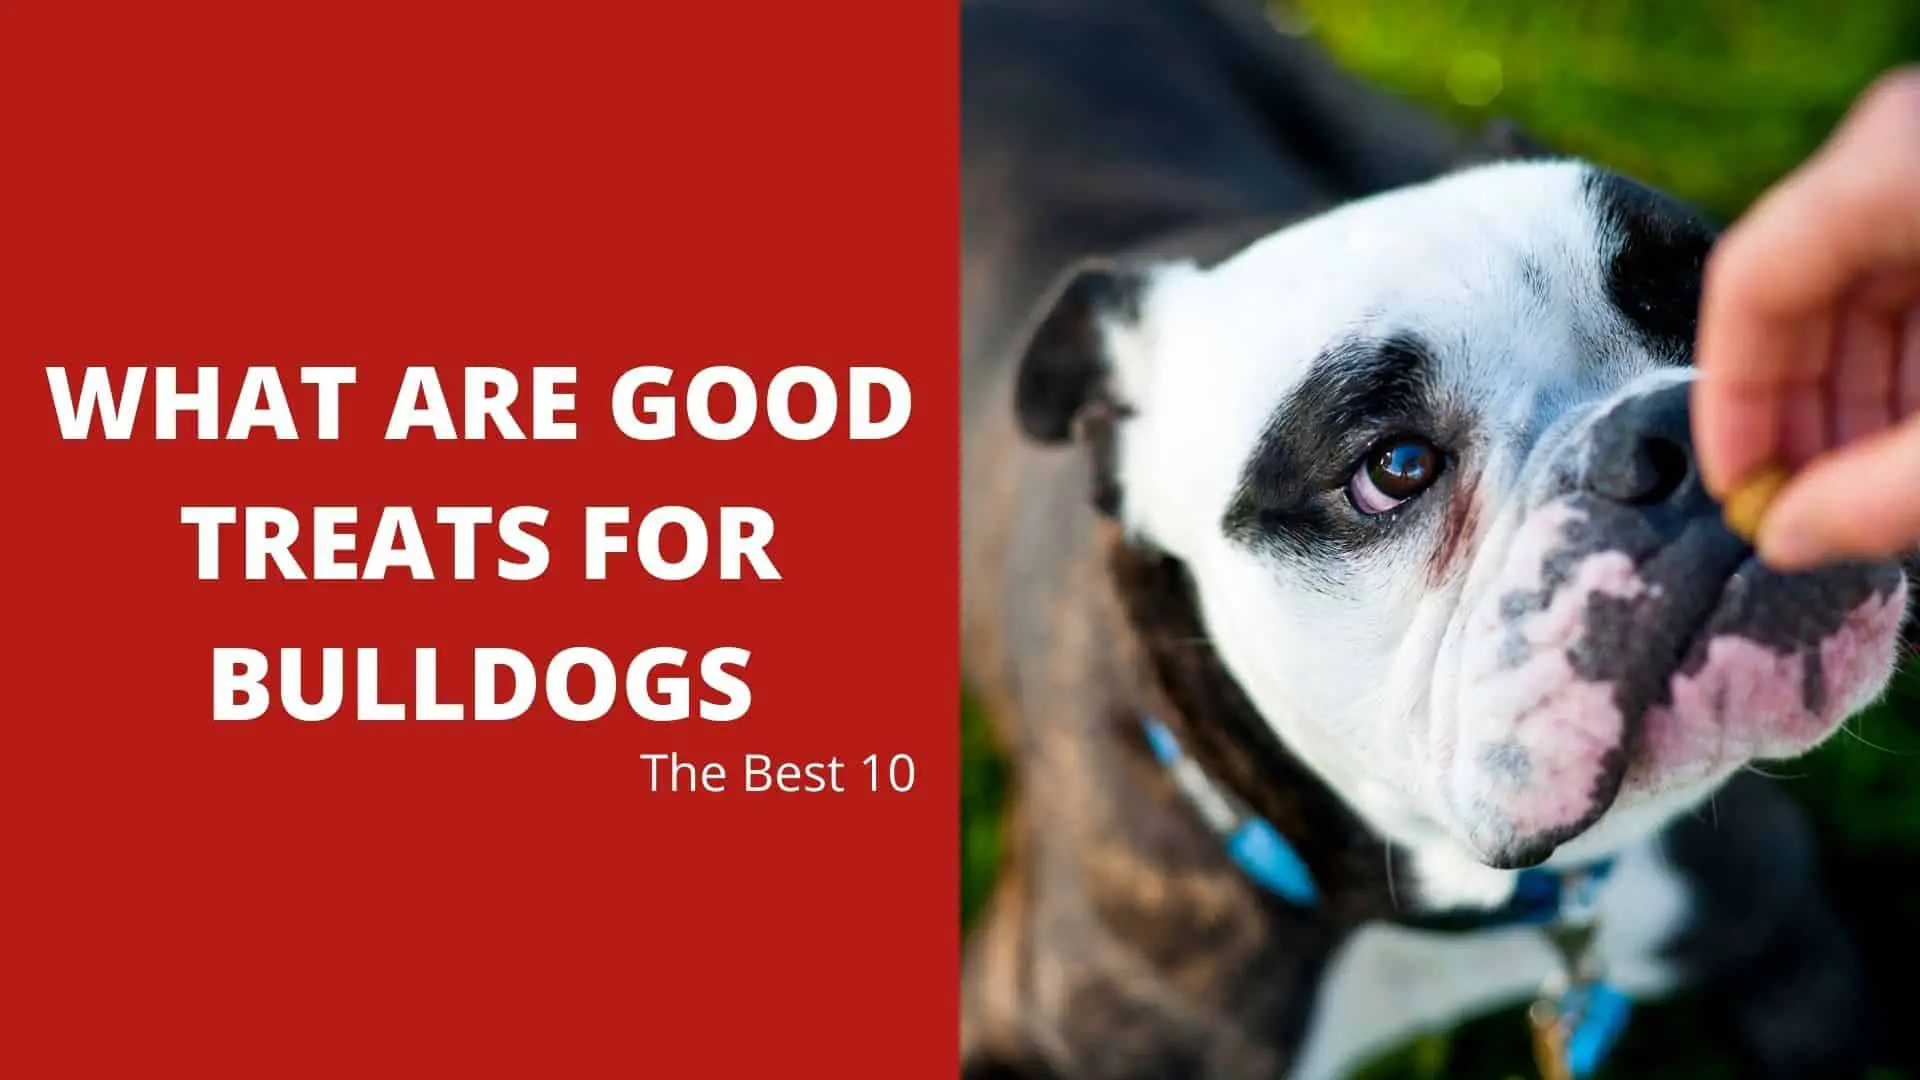 What Are Good Treats For Bulldogs? The Best 10